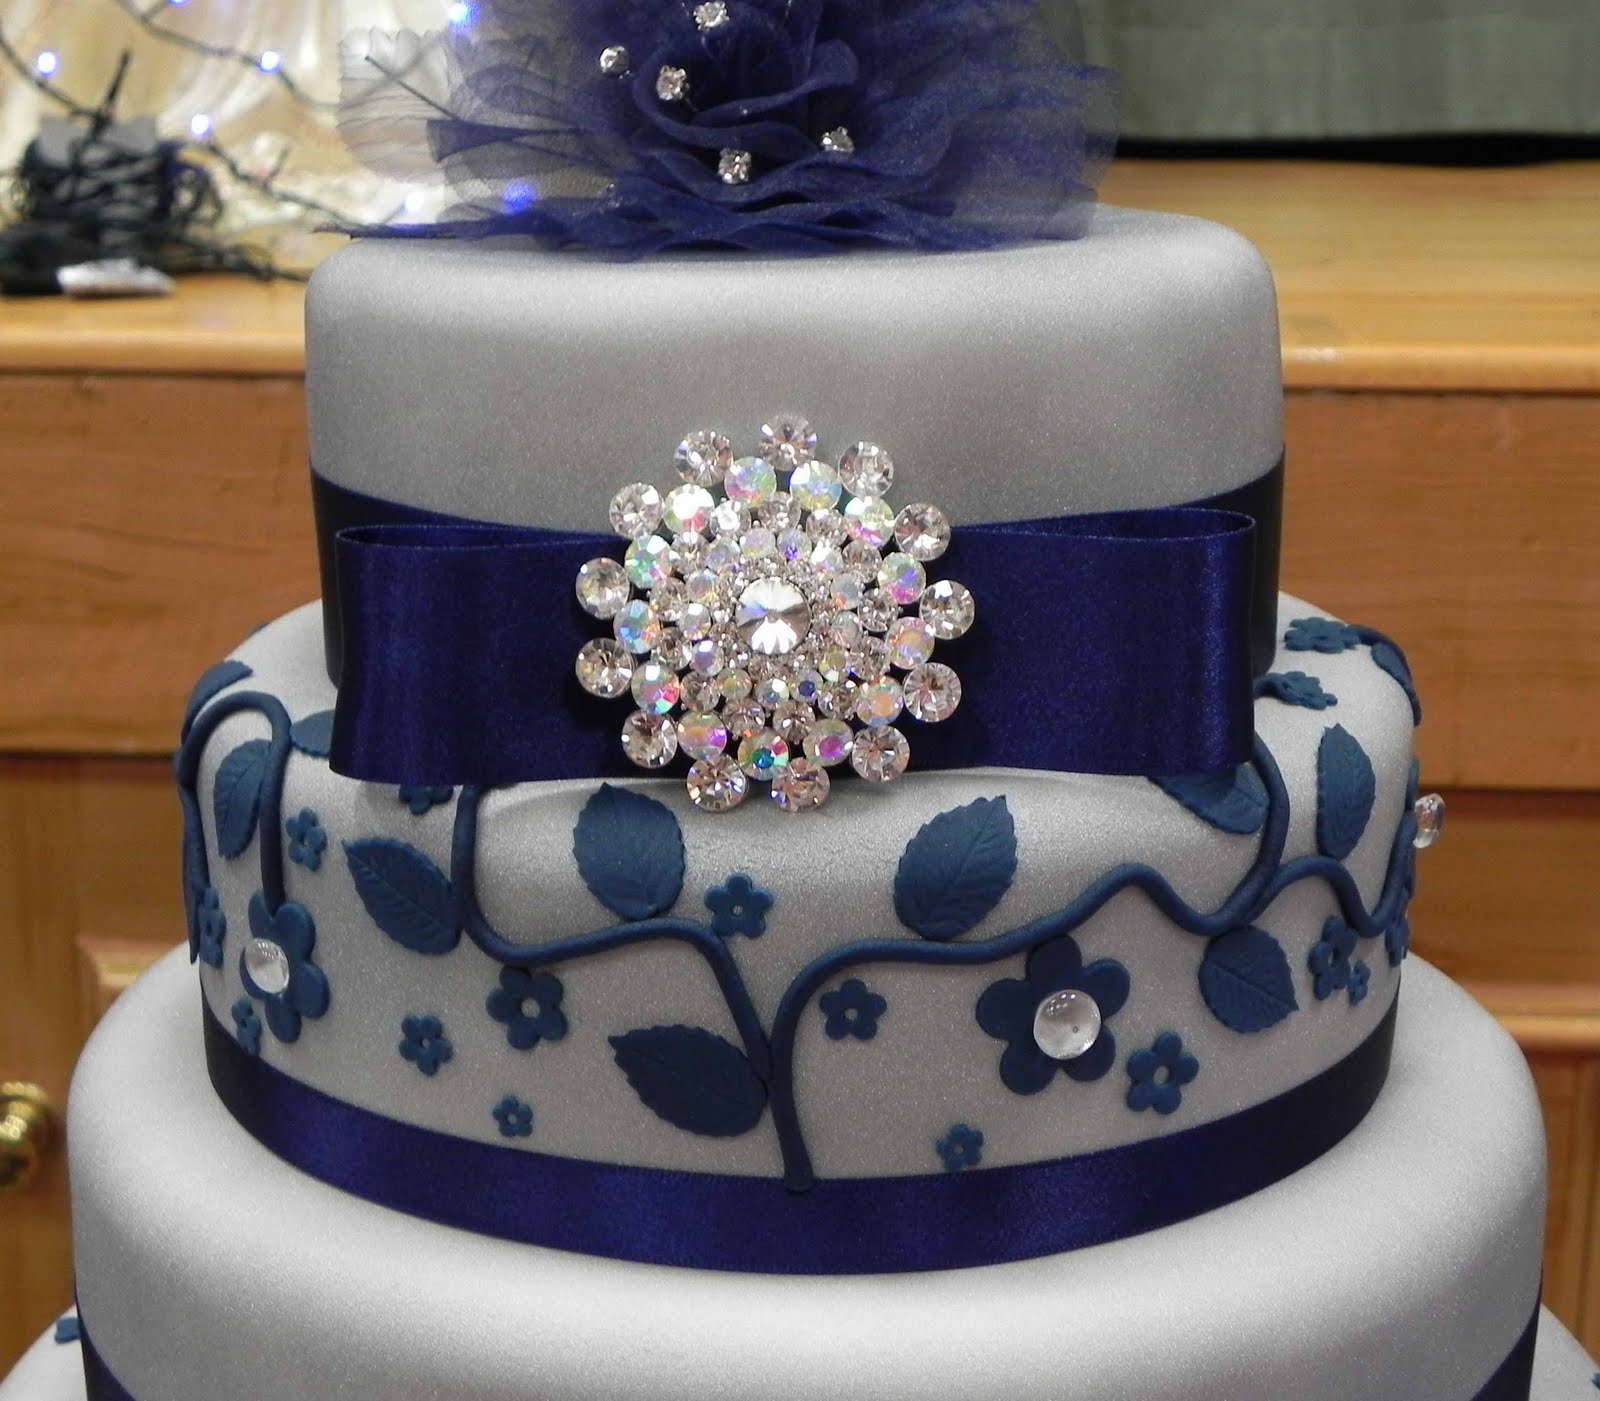 Cake by Lisa Price Silver and Blue wedding cake